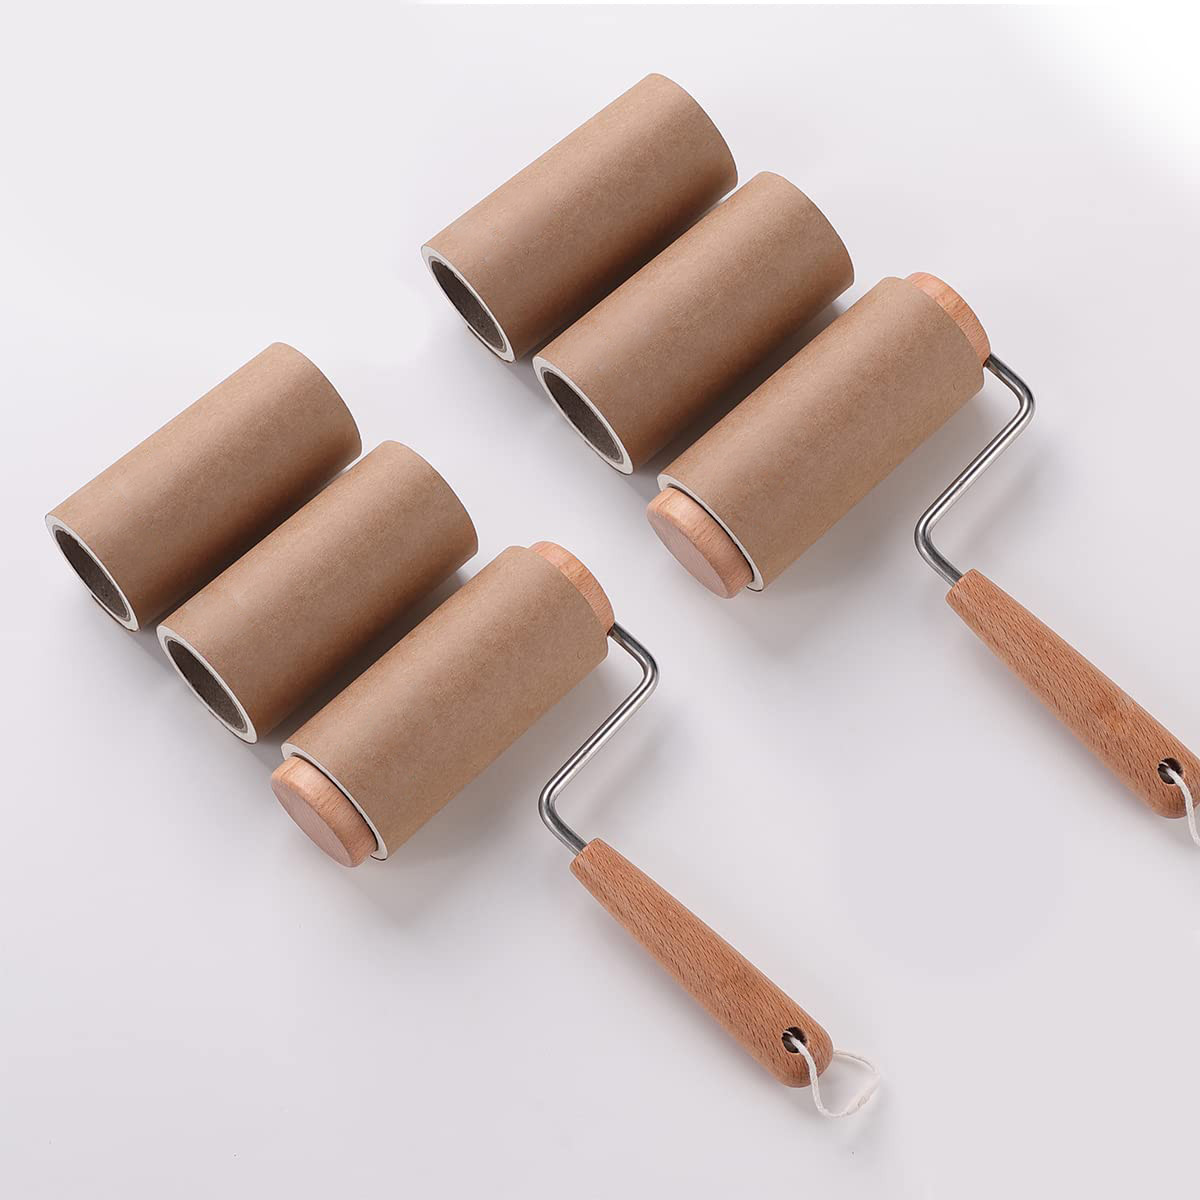 Kuber Industries Lint Roller | Wooden Lint Remover for Clothes | Pet Hair Roller | Sticky Lint Remover | 2 Roller + 4 Replacement Rolls -Total 360 Sheets | Pack of 2 | Brown